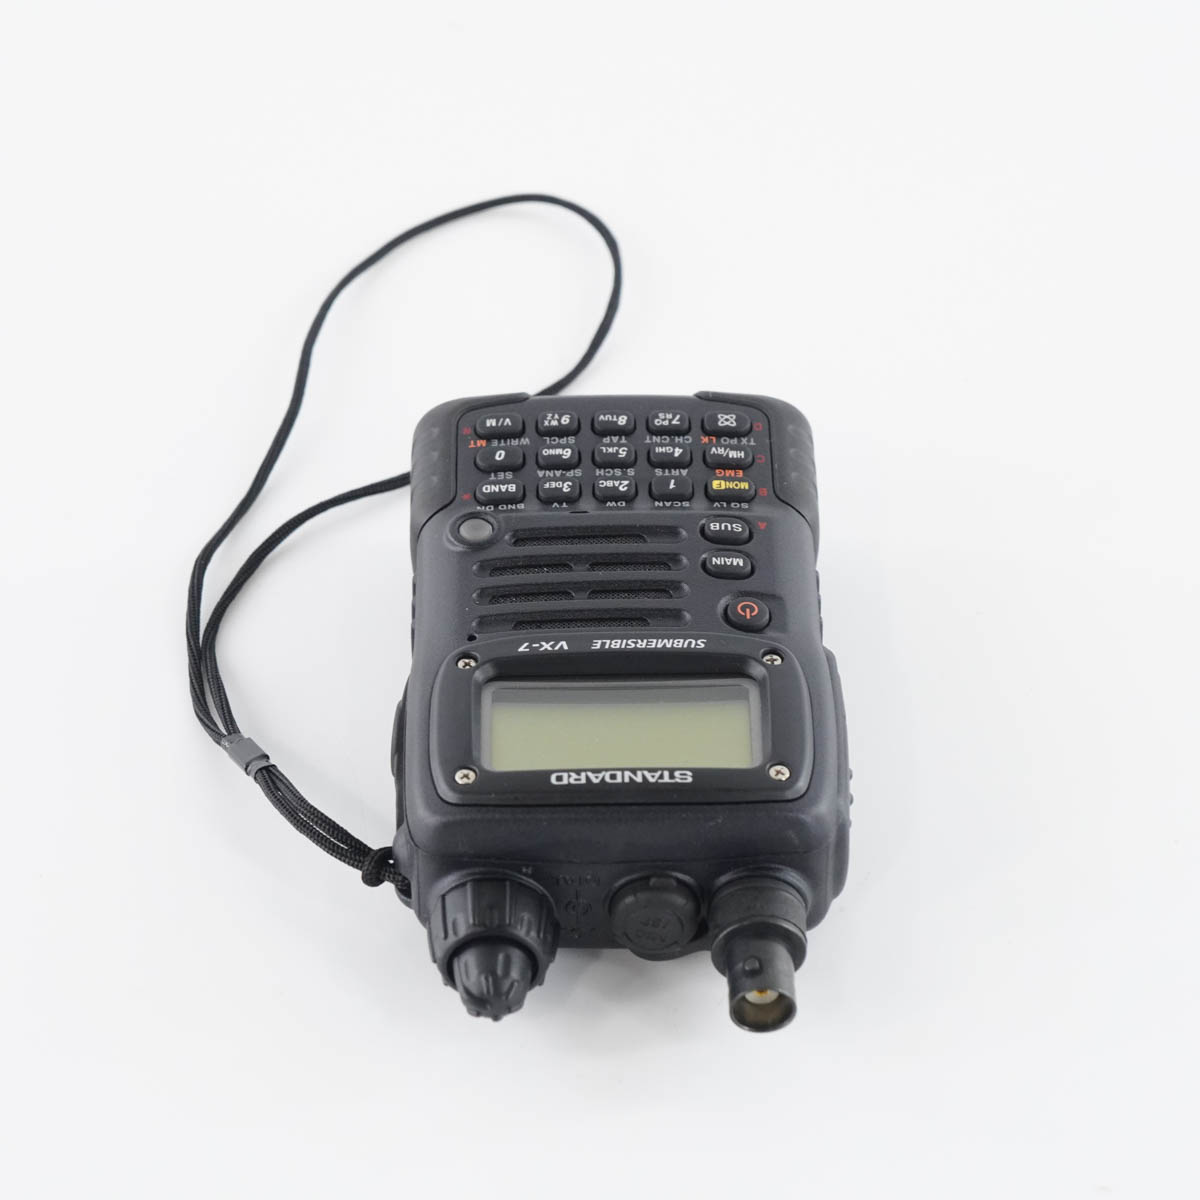 PG]USED 8日保証 美品 STANDARD VX-7 SUBMERSIBLE 50/144/430MHz 